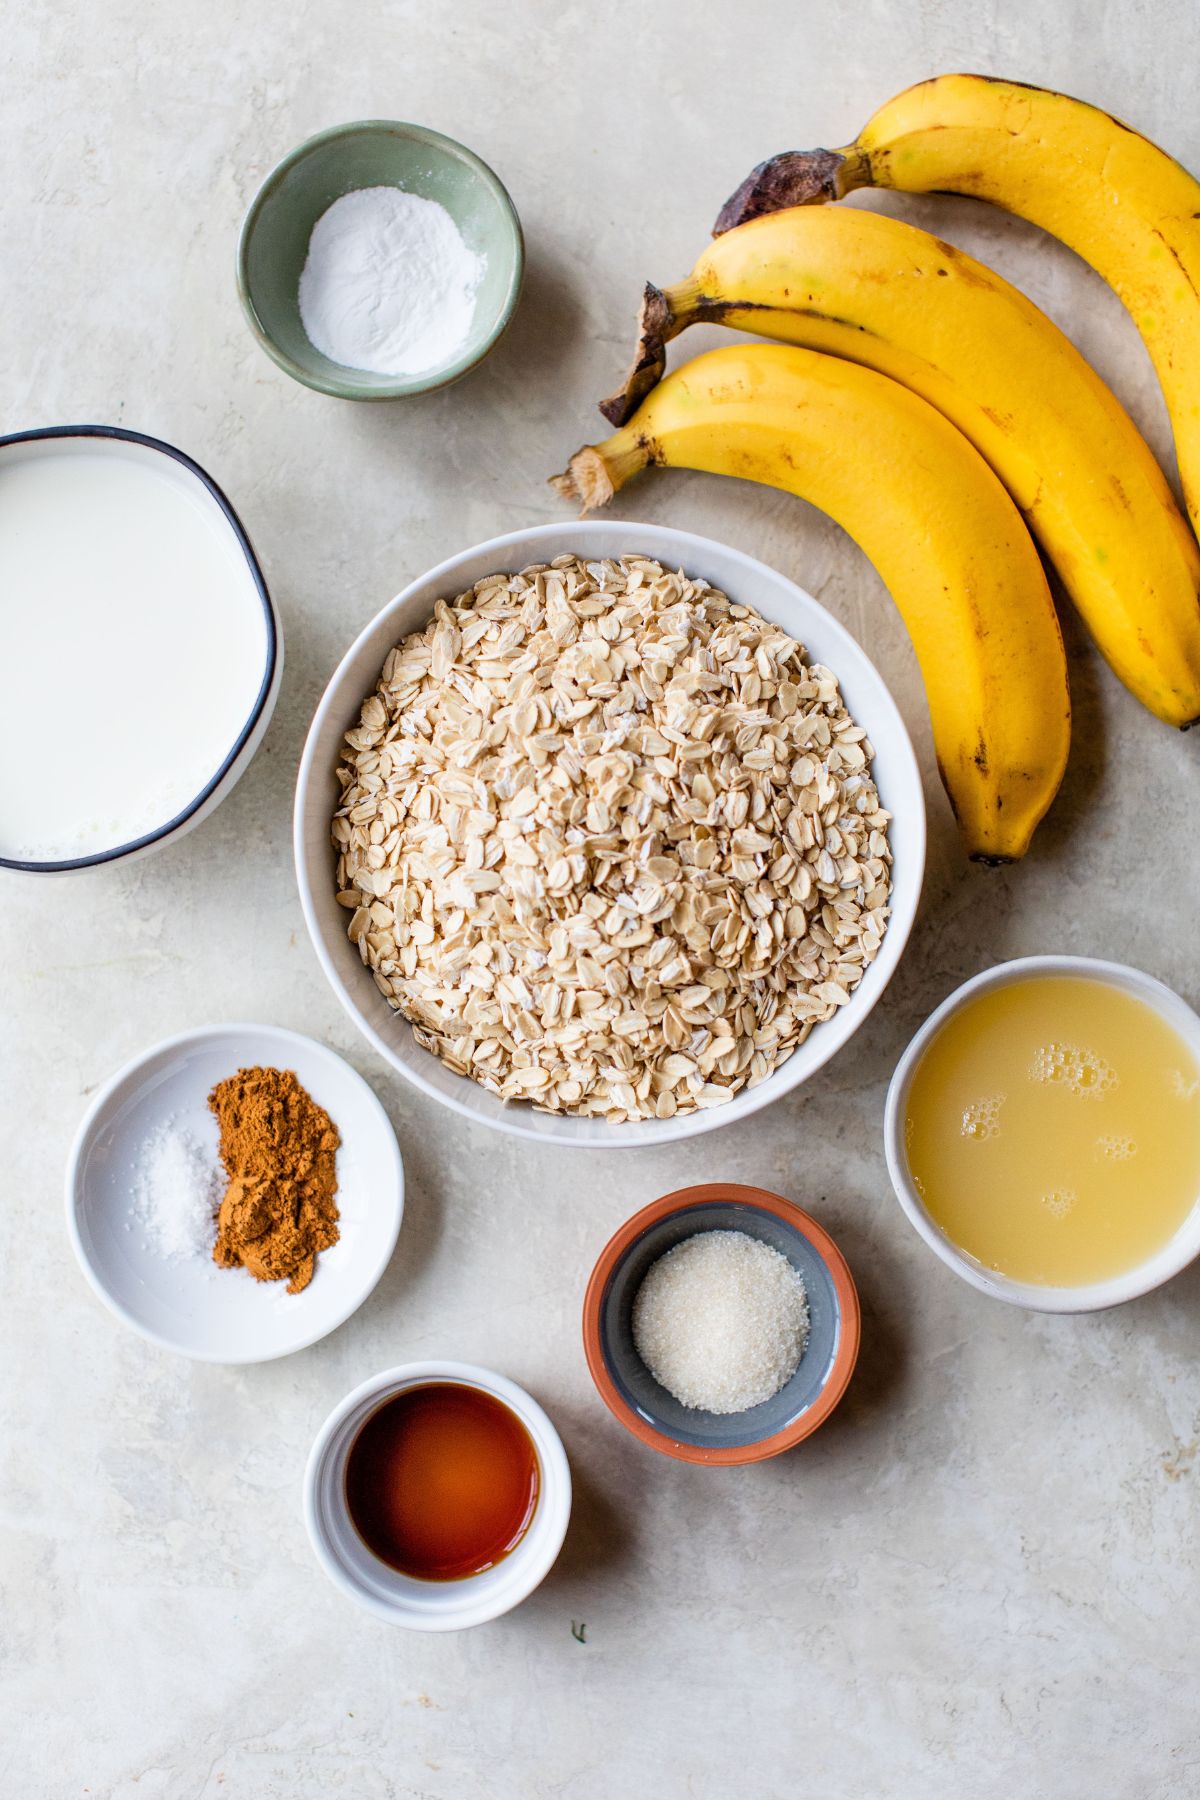 Rolled oats, bananas and other ingredients portioned into small bowls.